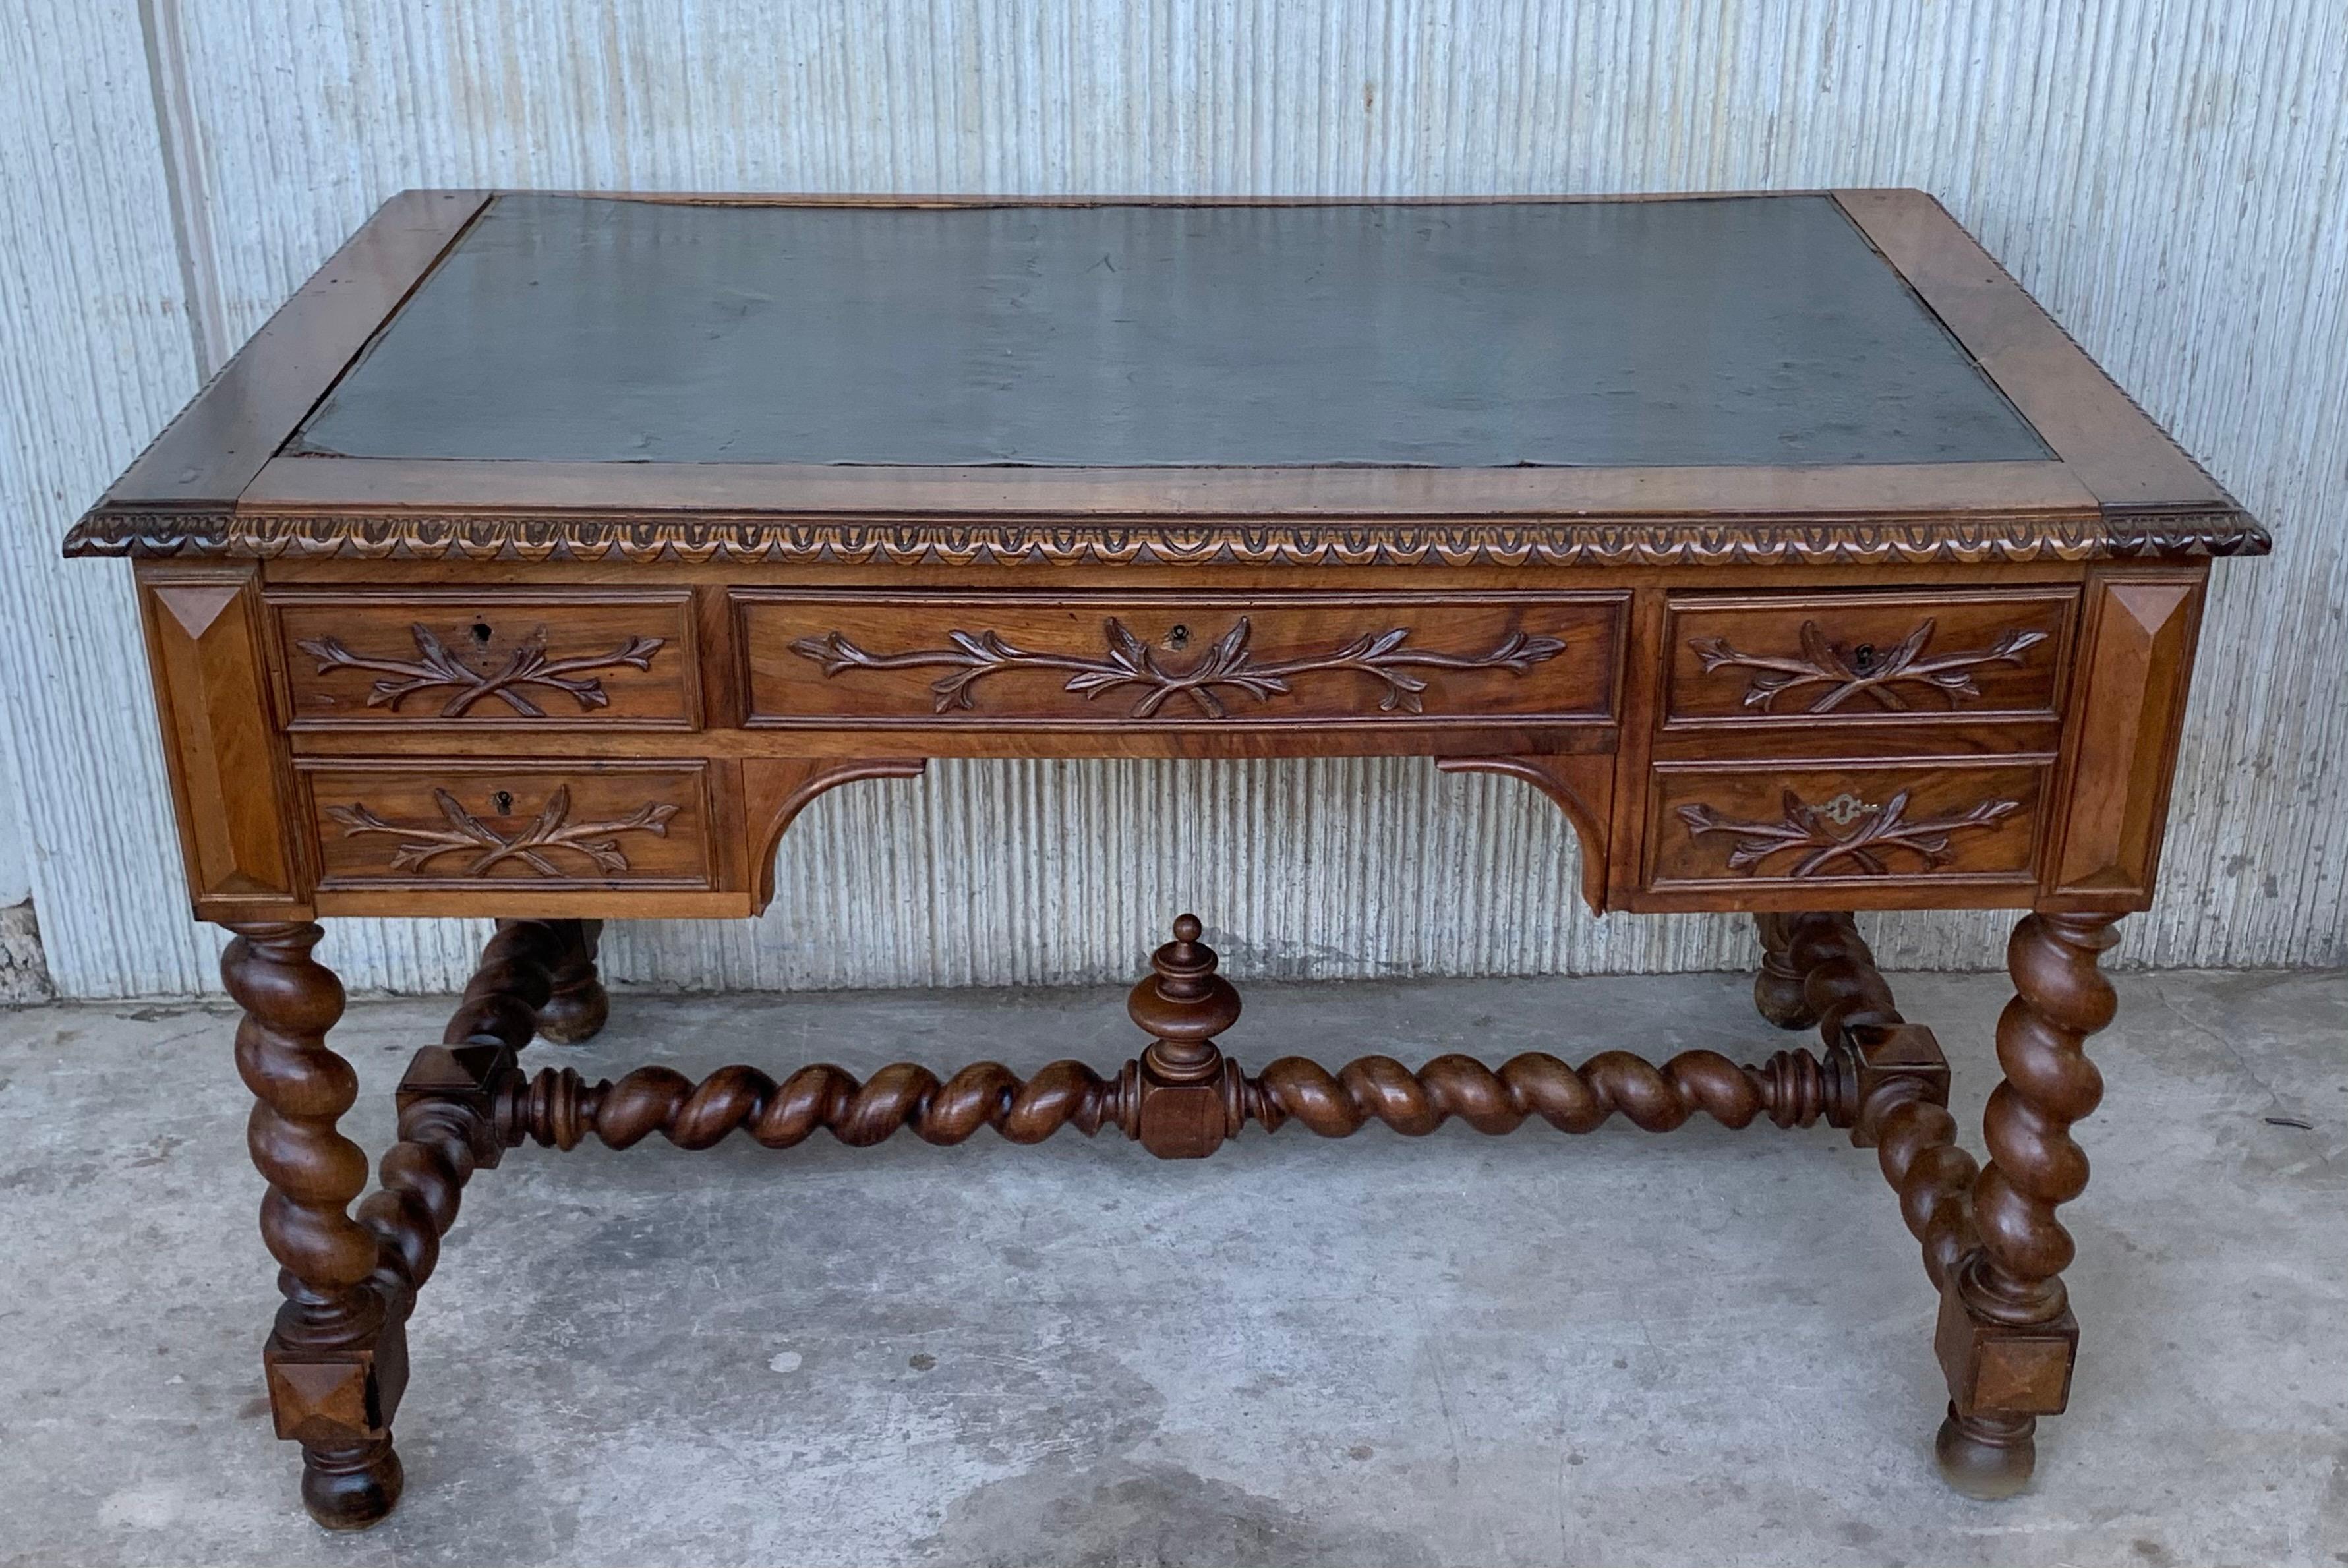 From France, circa 1860, this ornate, stripped oak desk has been carved in the Renaissance style and inset with a leather top. The H-shaped stretcher has a repeating Solomonic motif. . As the Renaissance advanced from the Early to the High